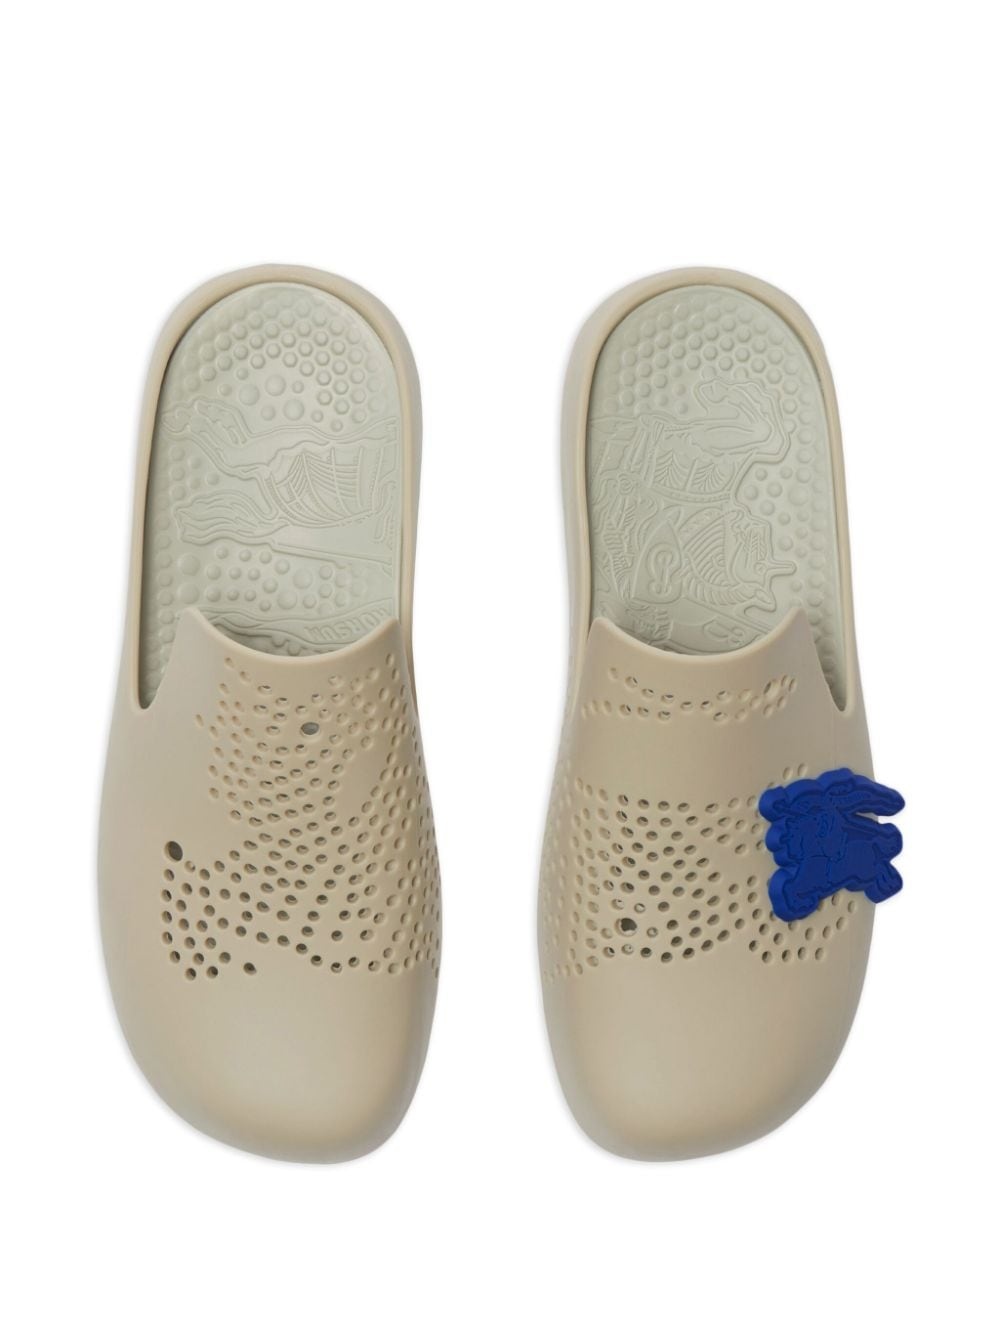 Stingray perforated clogs - 4